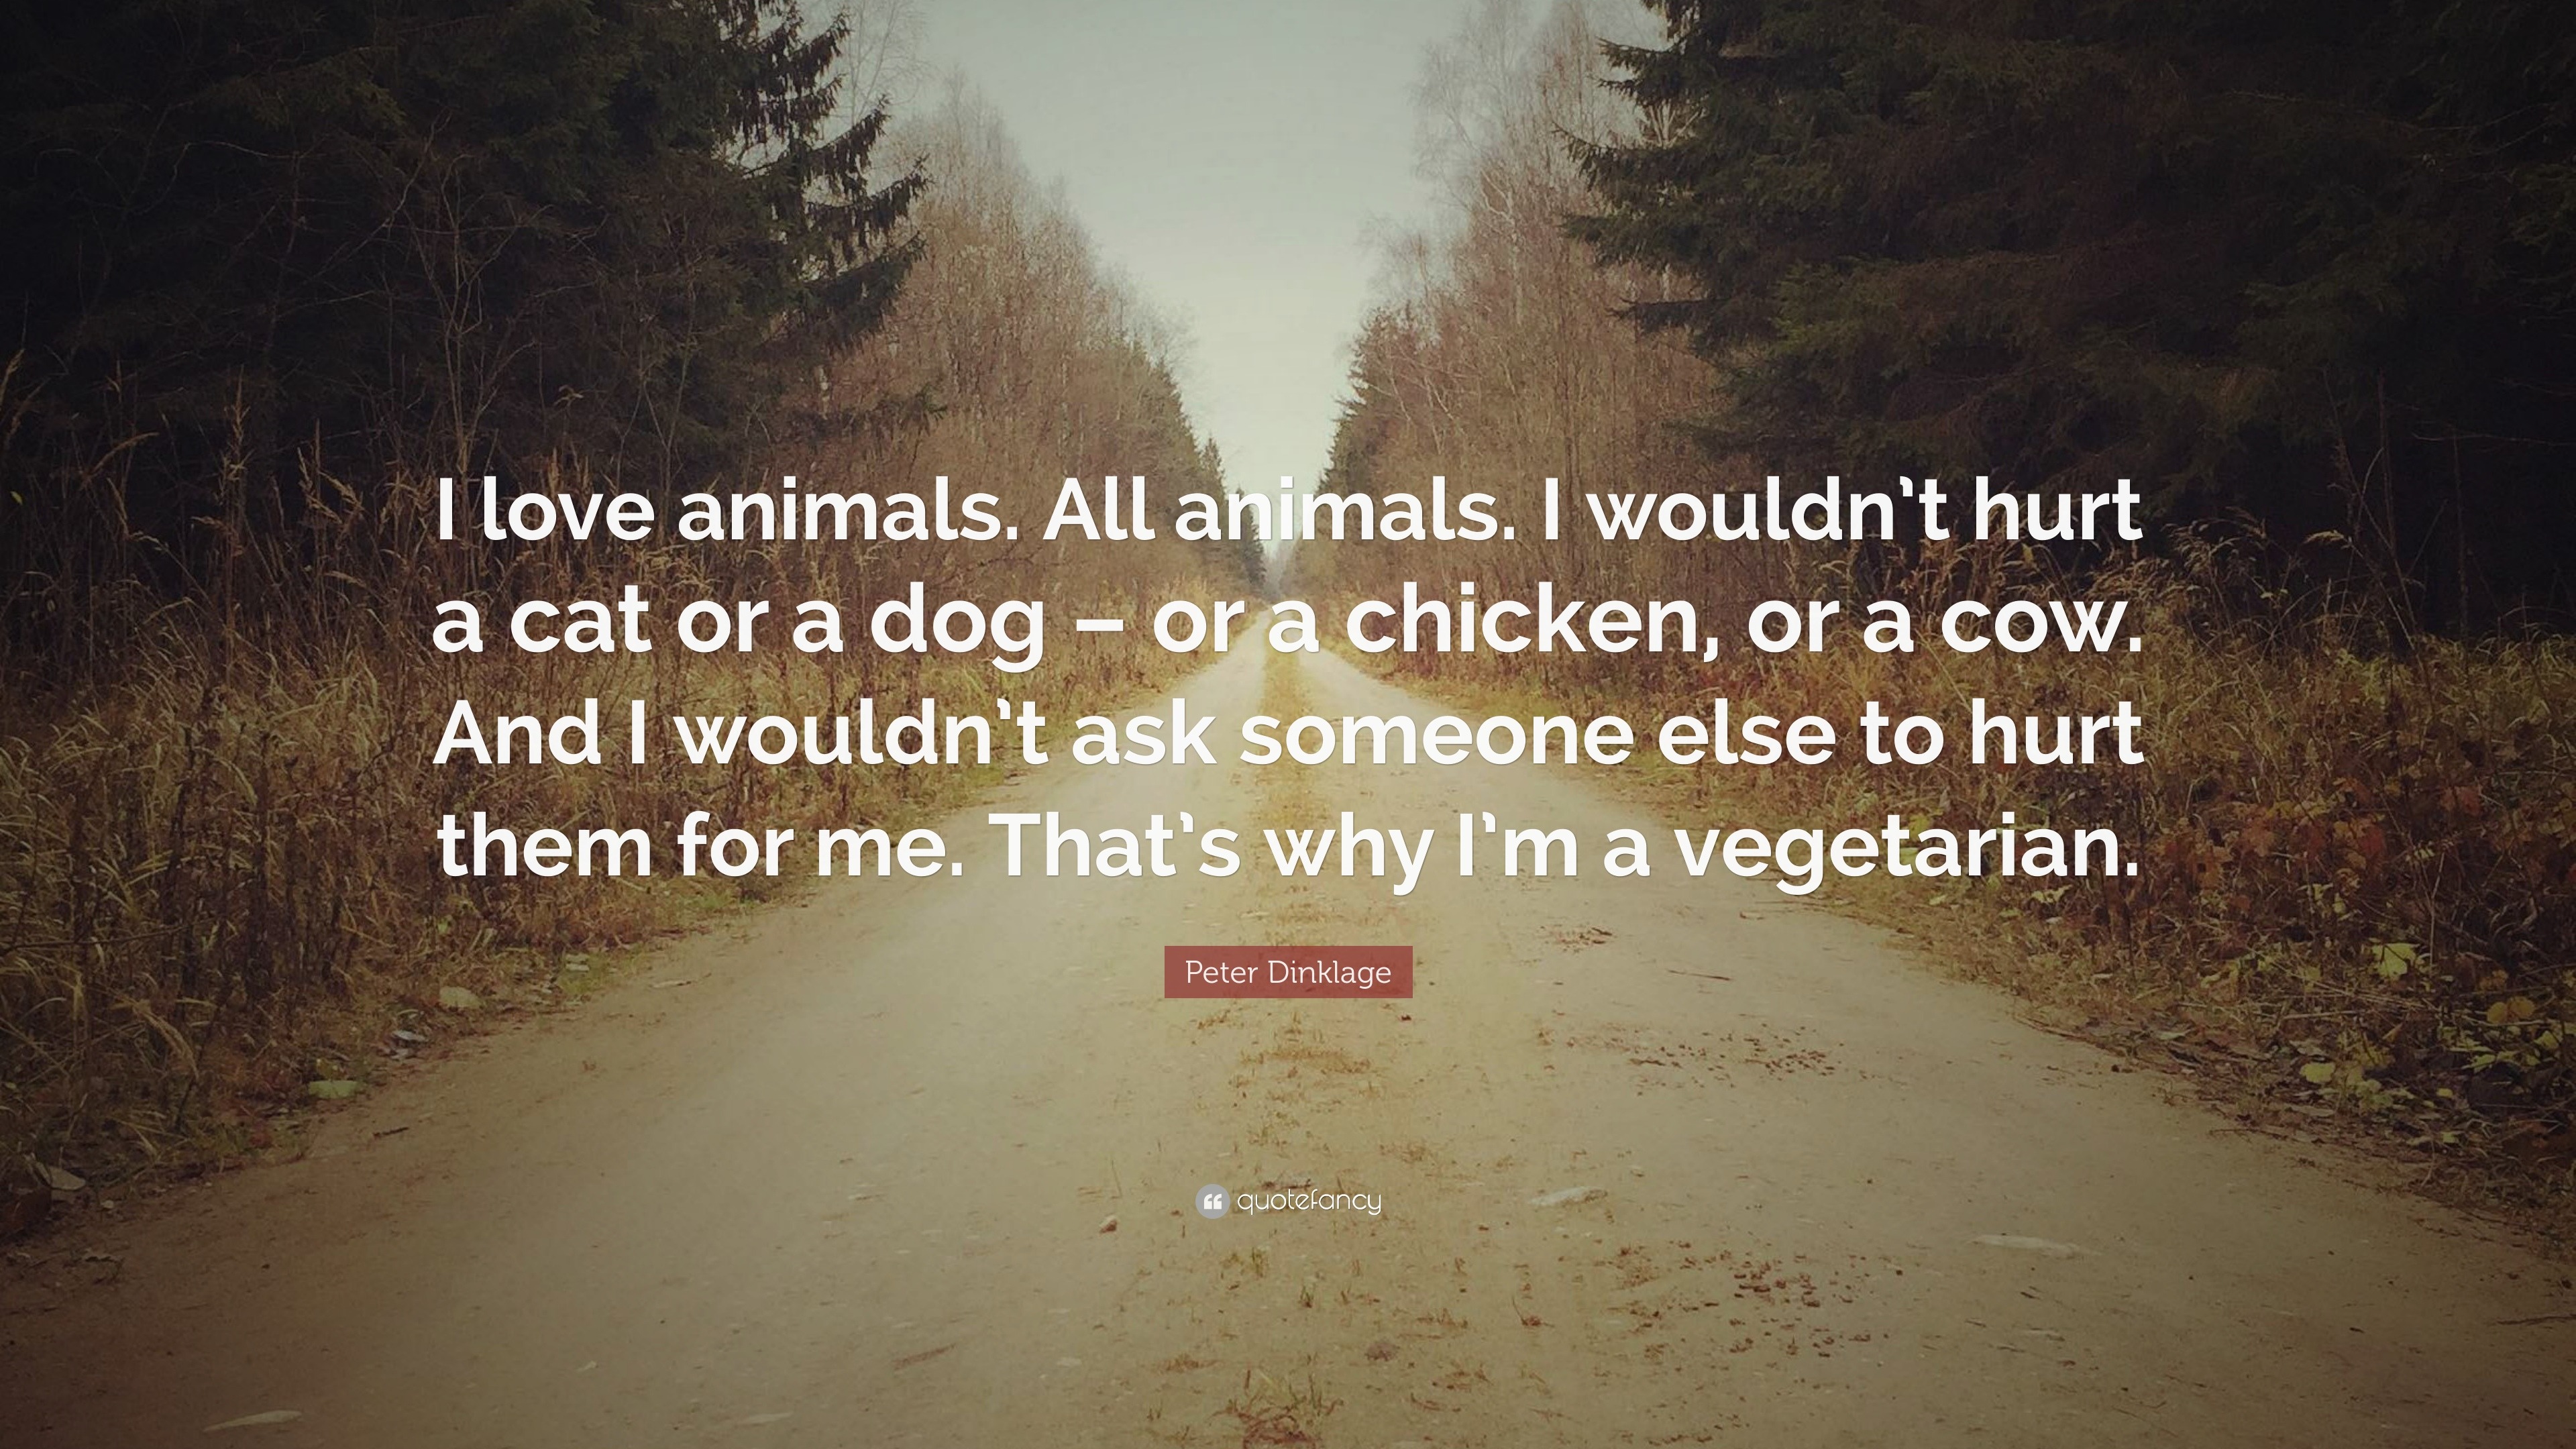 Peter Dinklage Quote: “I love animals. All animals. I wouldn't hurt a cat  or a dog – or a chicken, or a cow. And I wouldn't ask someone else to...”